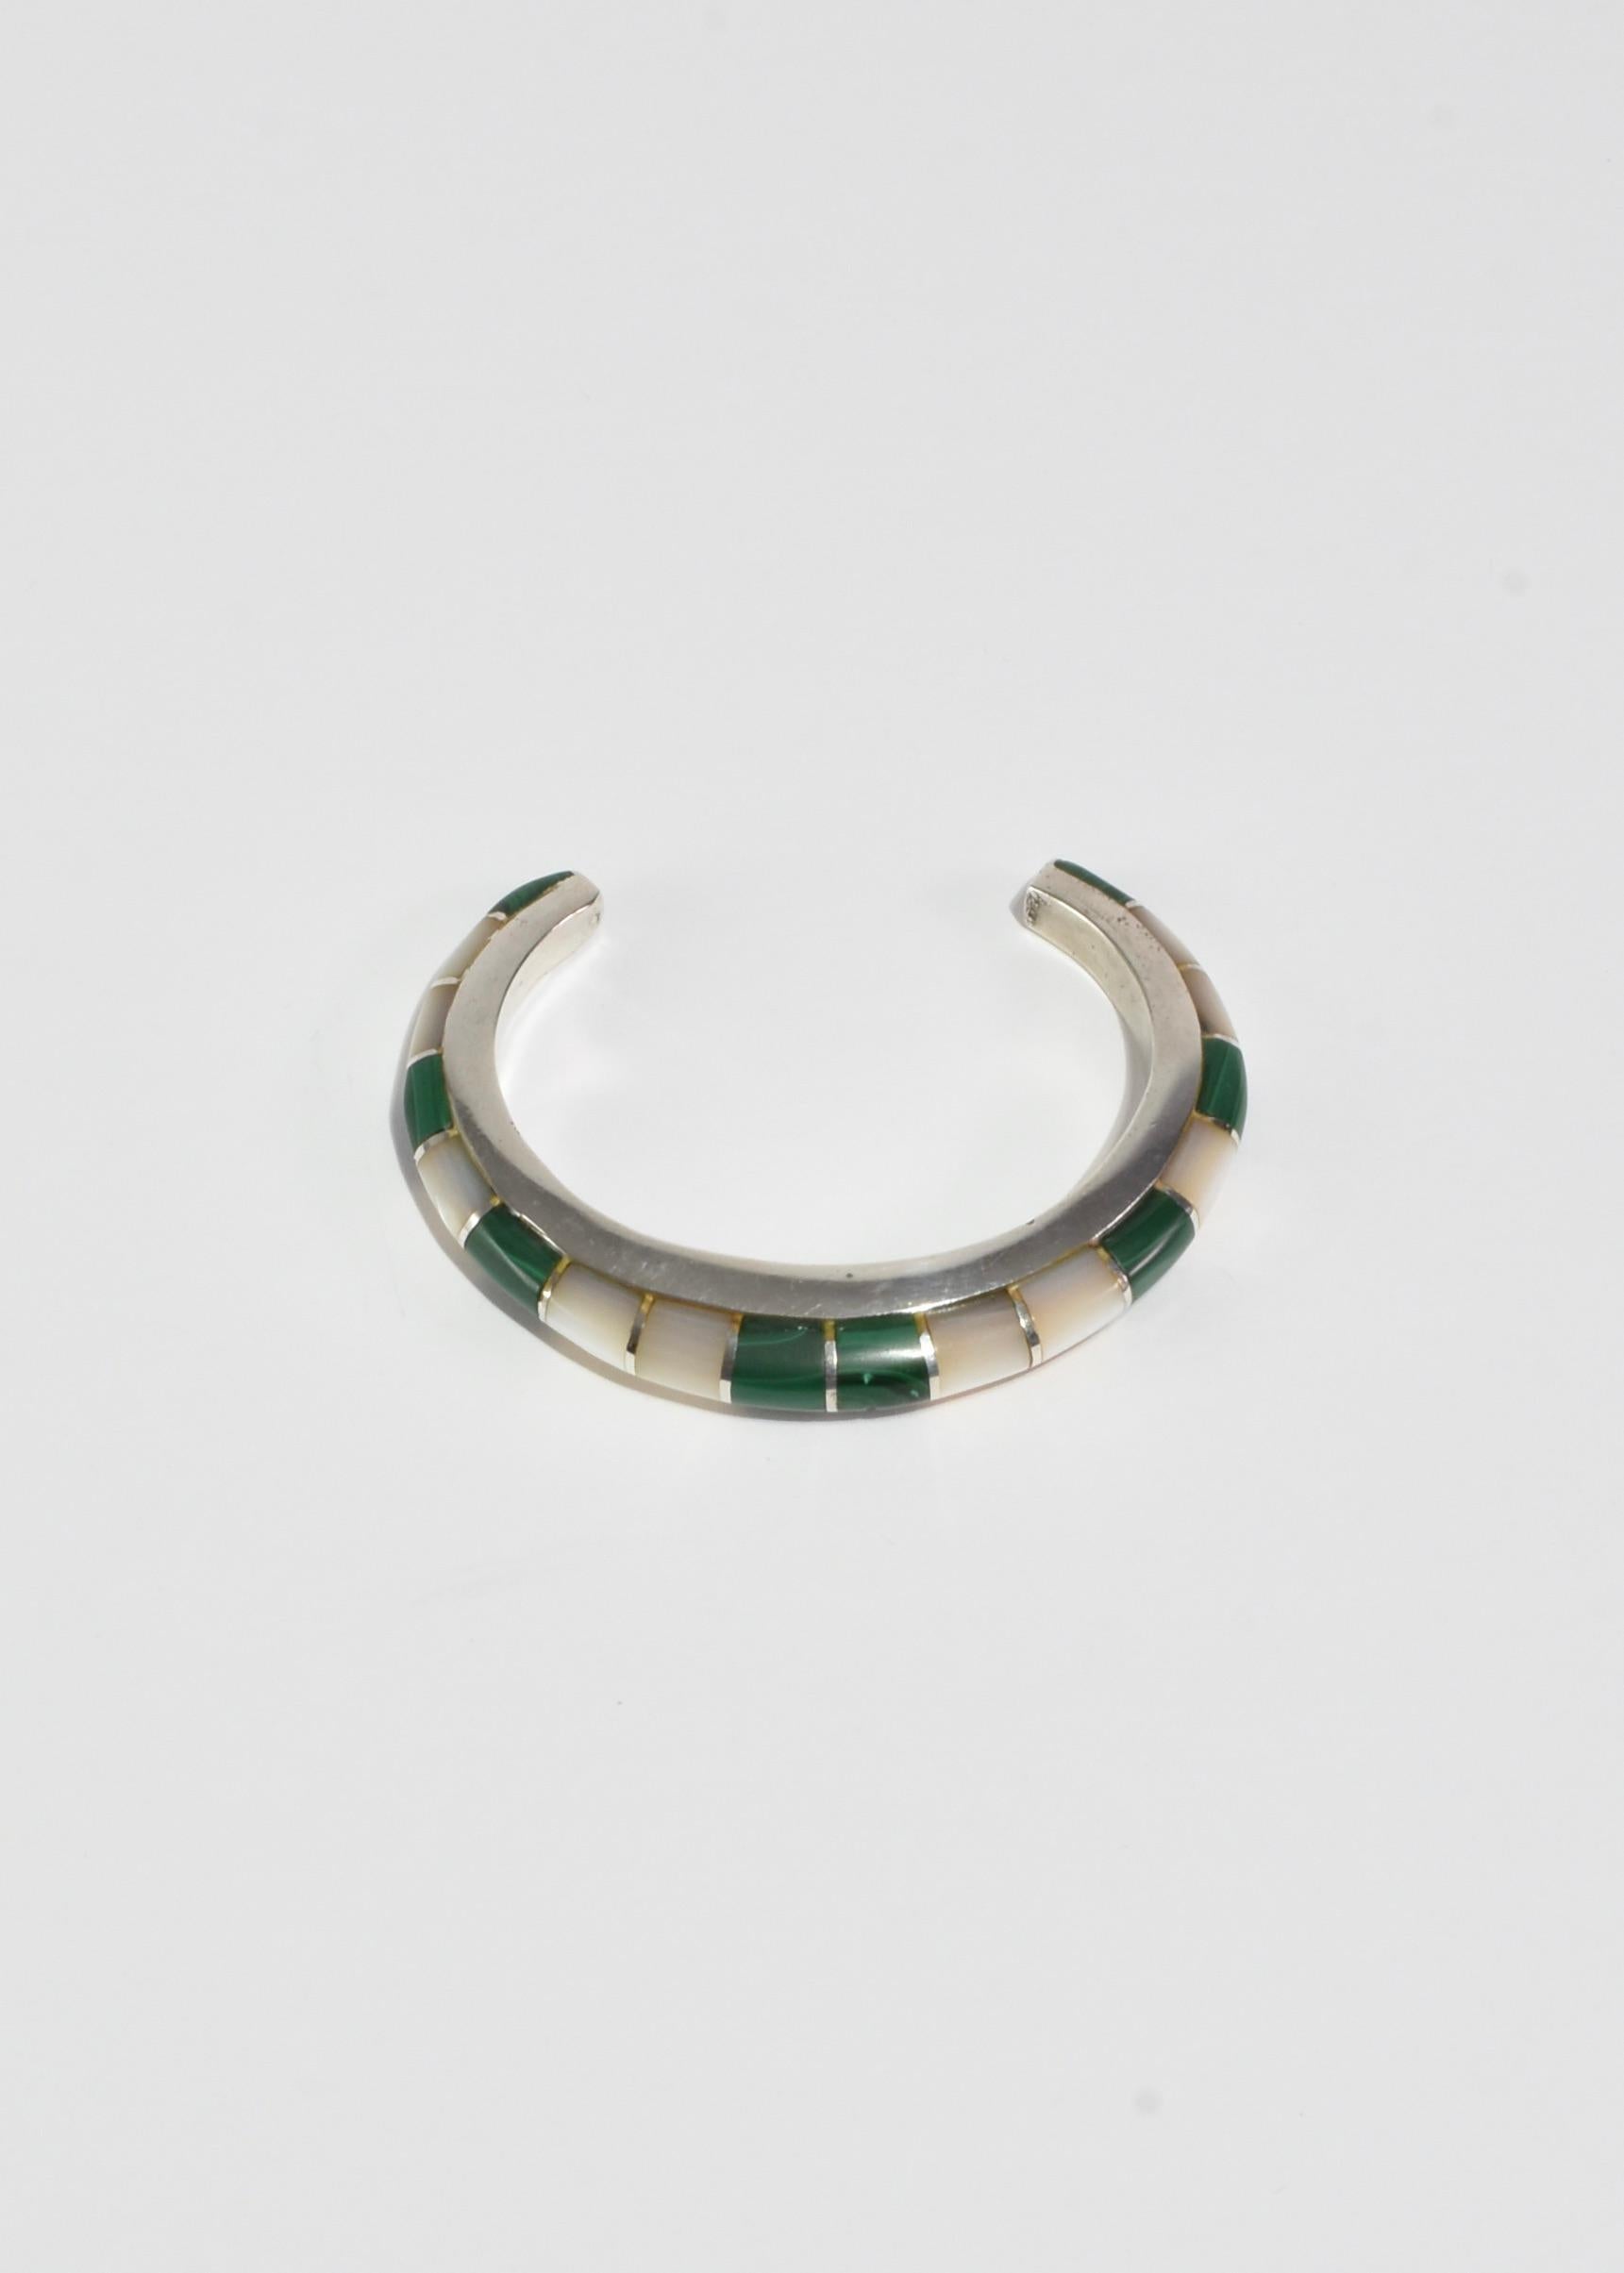 Stunning vintage silver bracelet with malachite and mother of pearl stripe detail.

Material: Sterling silver, mother of pearl, malachite.